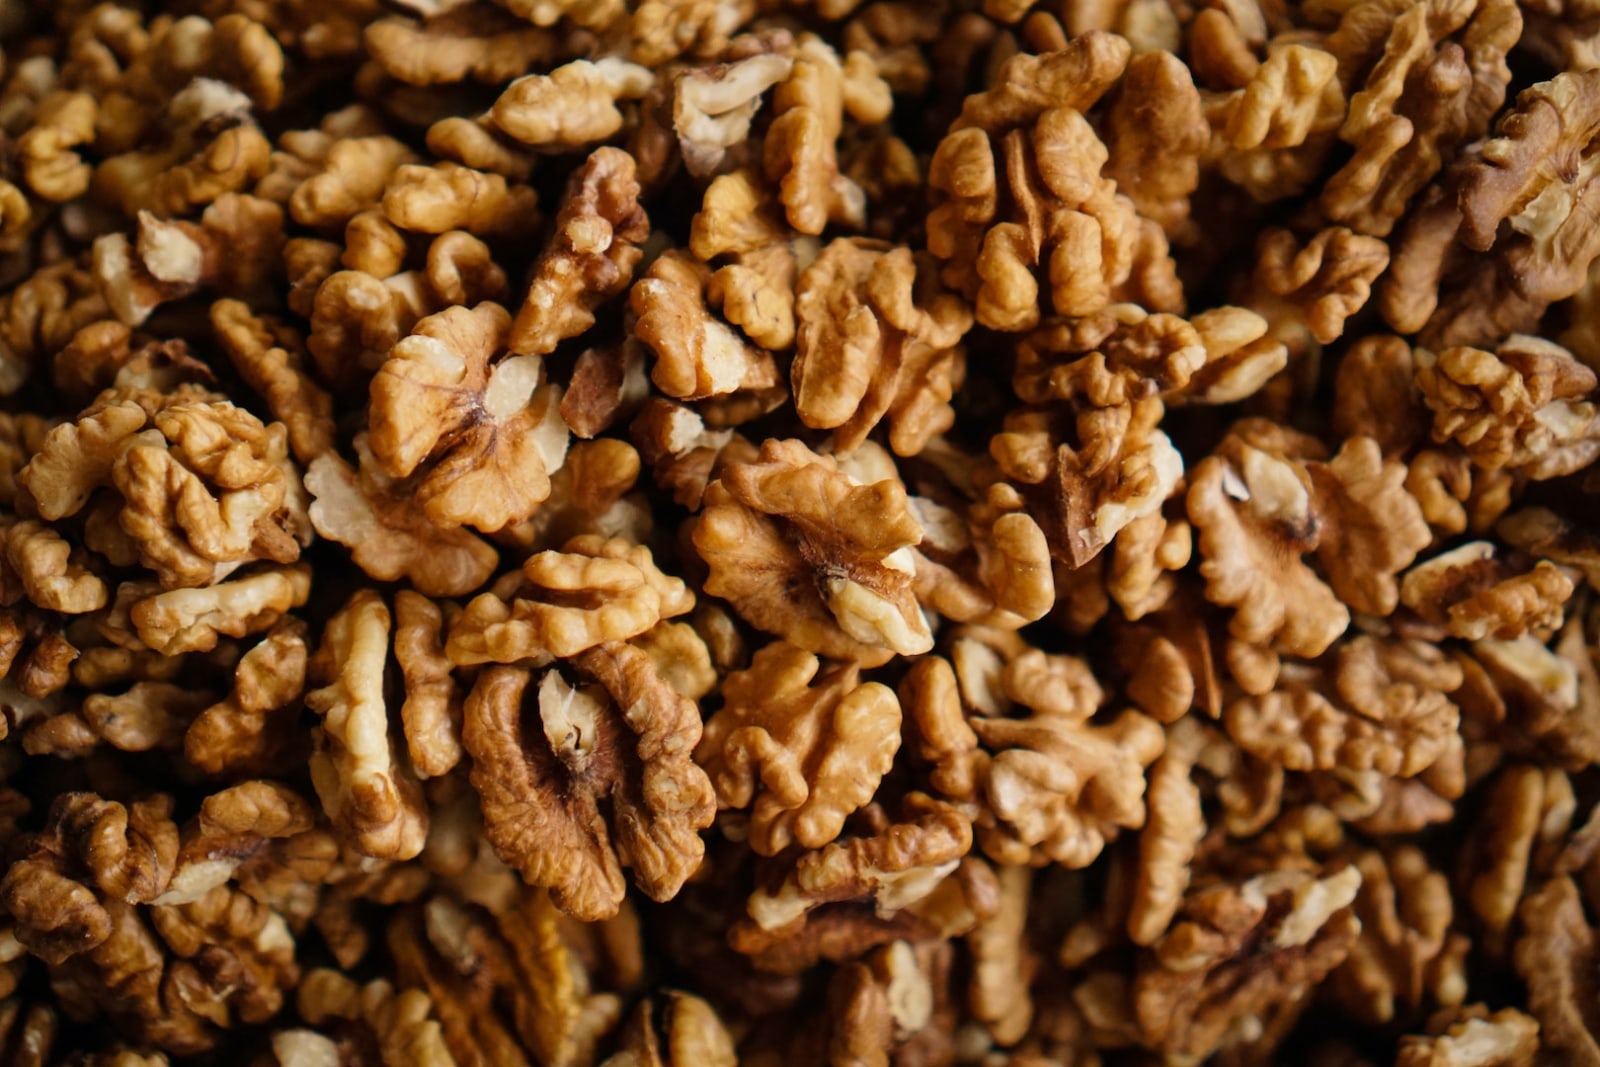 Image of walnuts. Learn how to make walnut oil by following LĒVO's recipe.